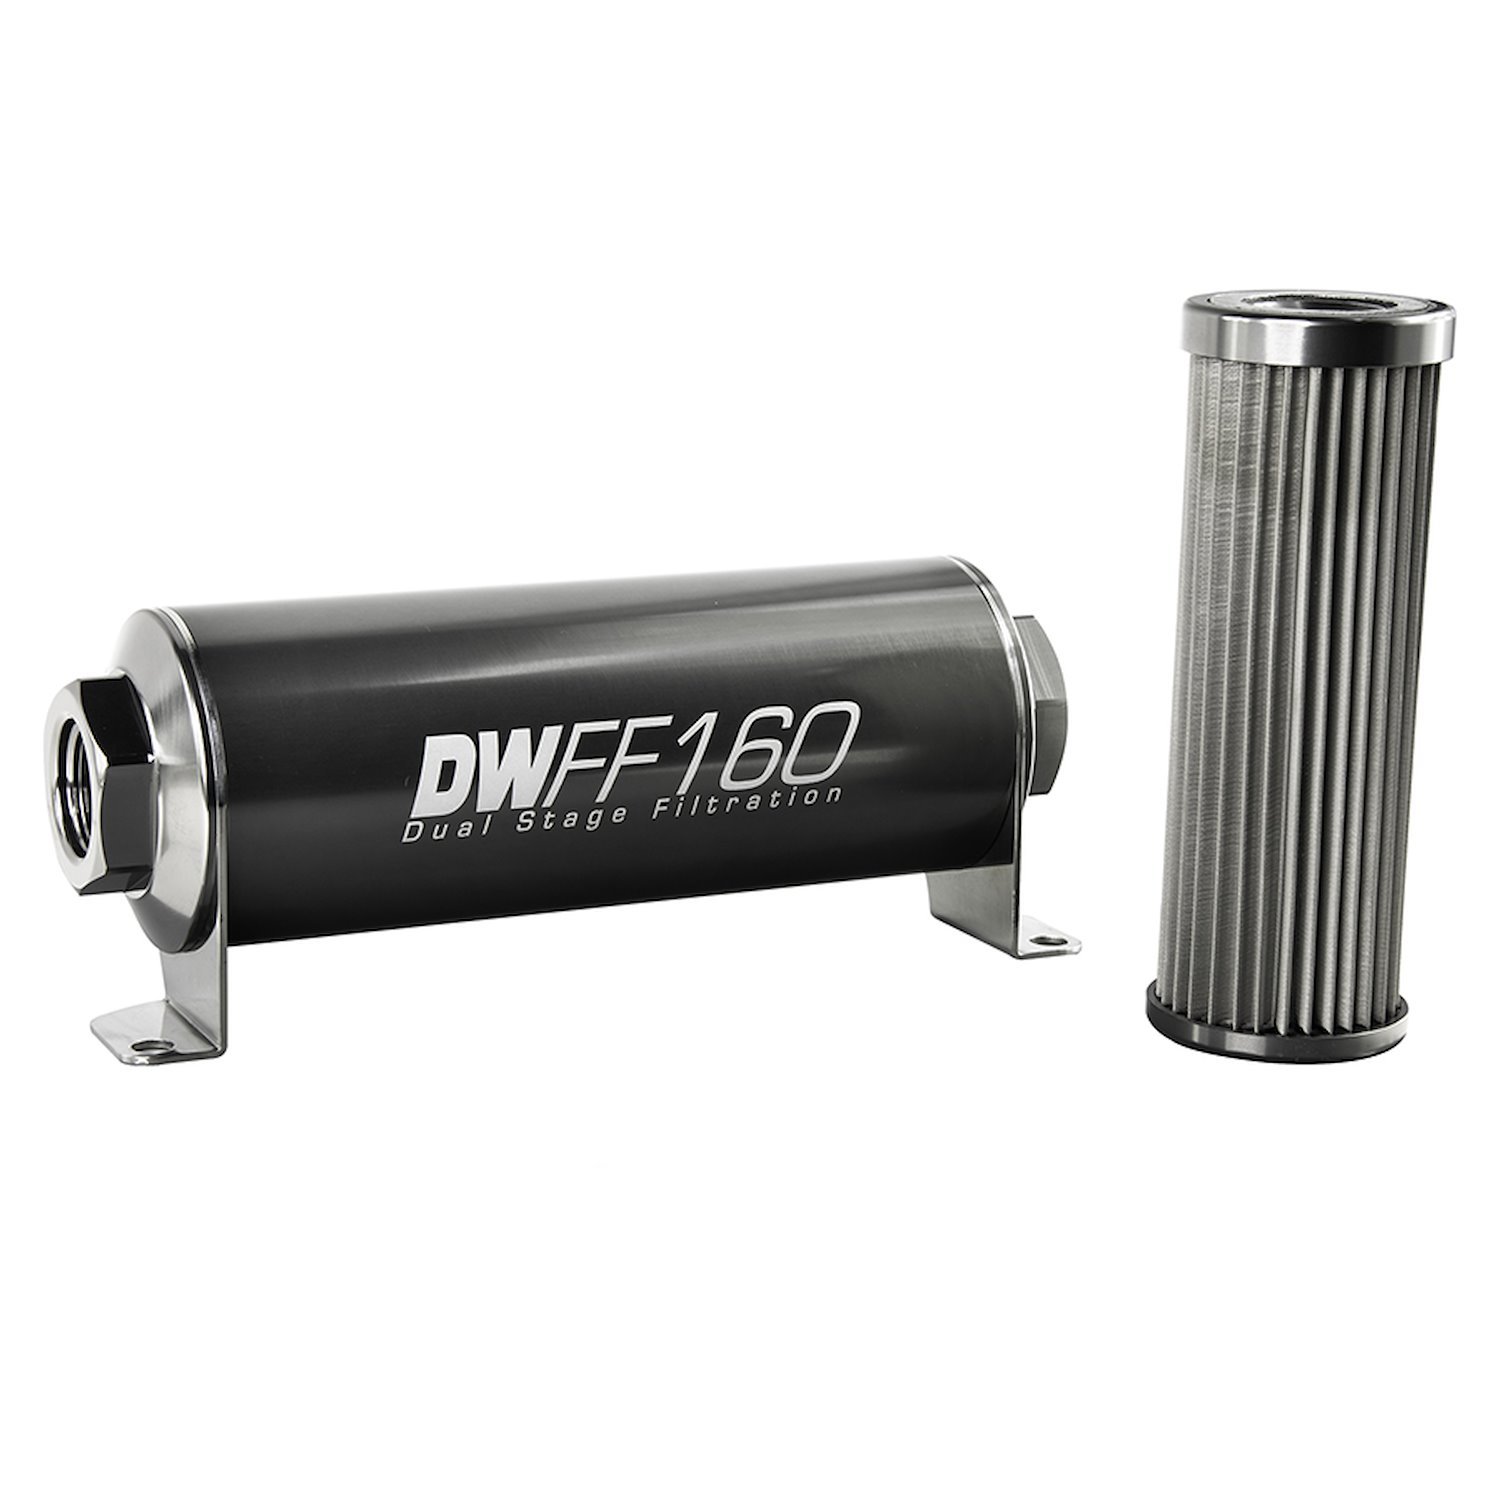 803160010K In-line fuel filter element and housing kit stainless steel 10 micron -10AN 160mm. Universal